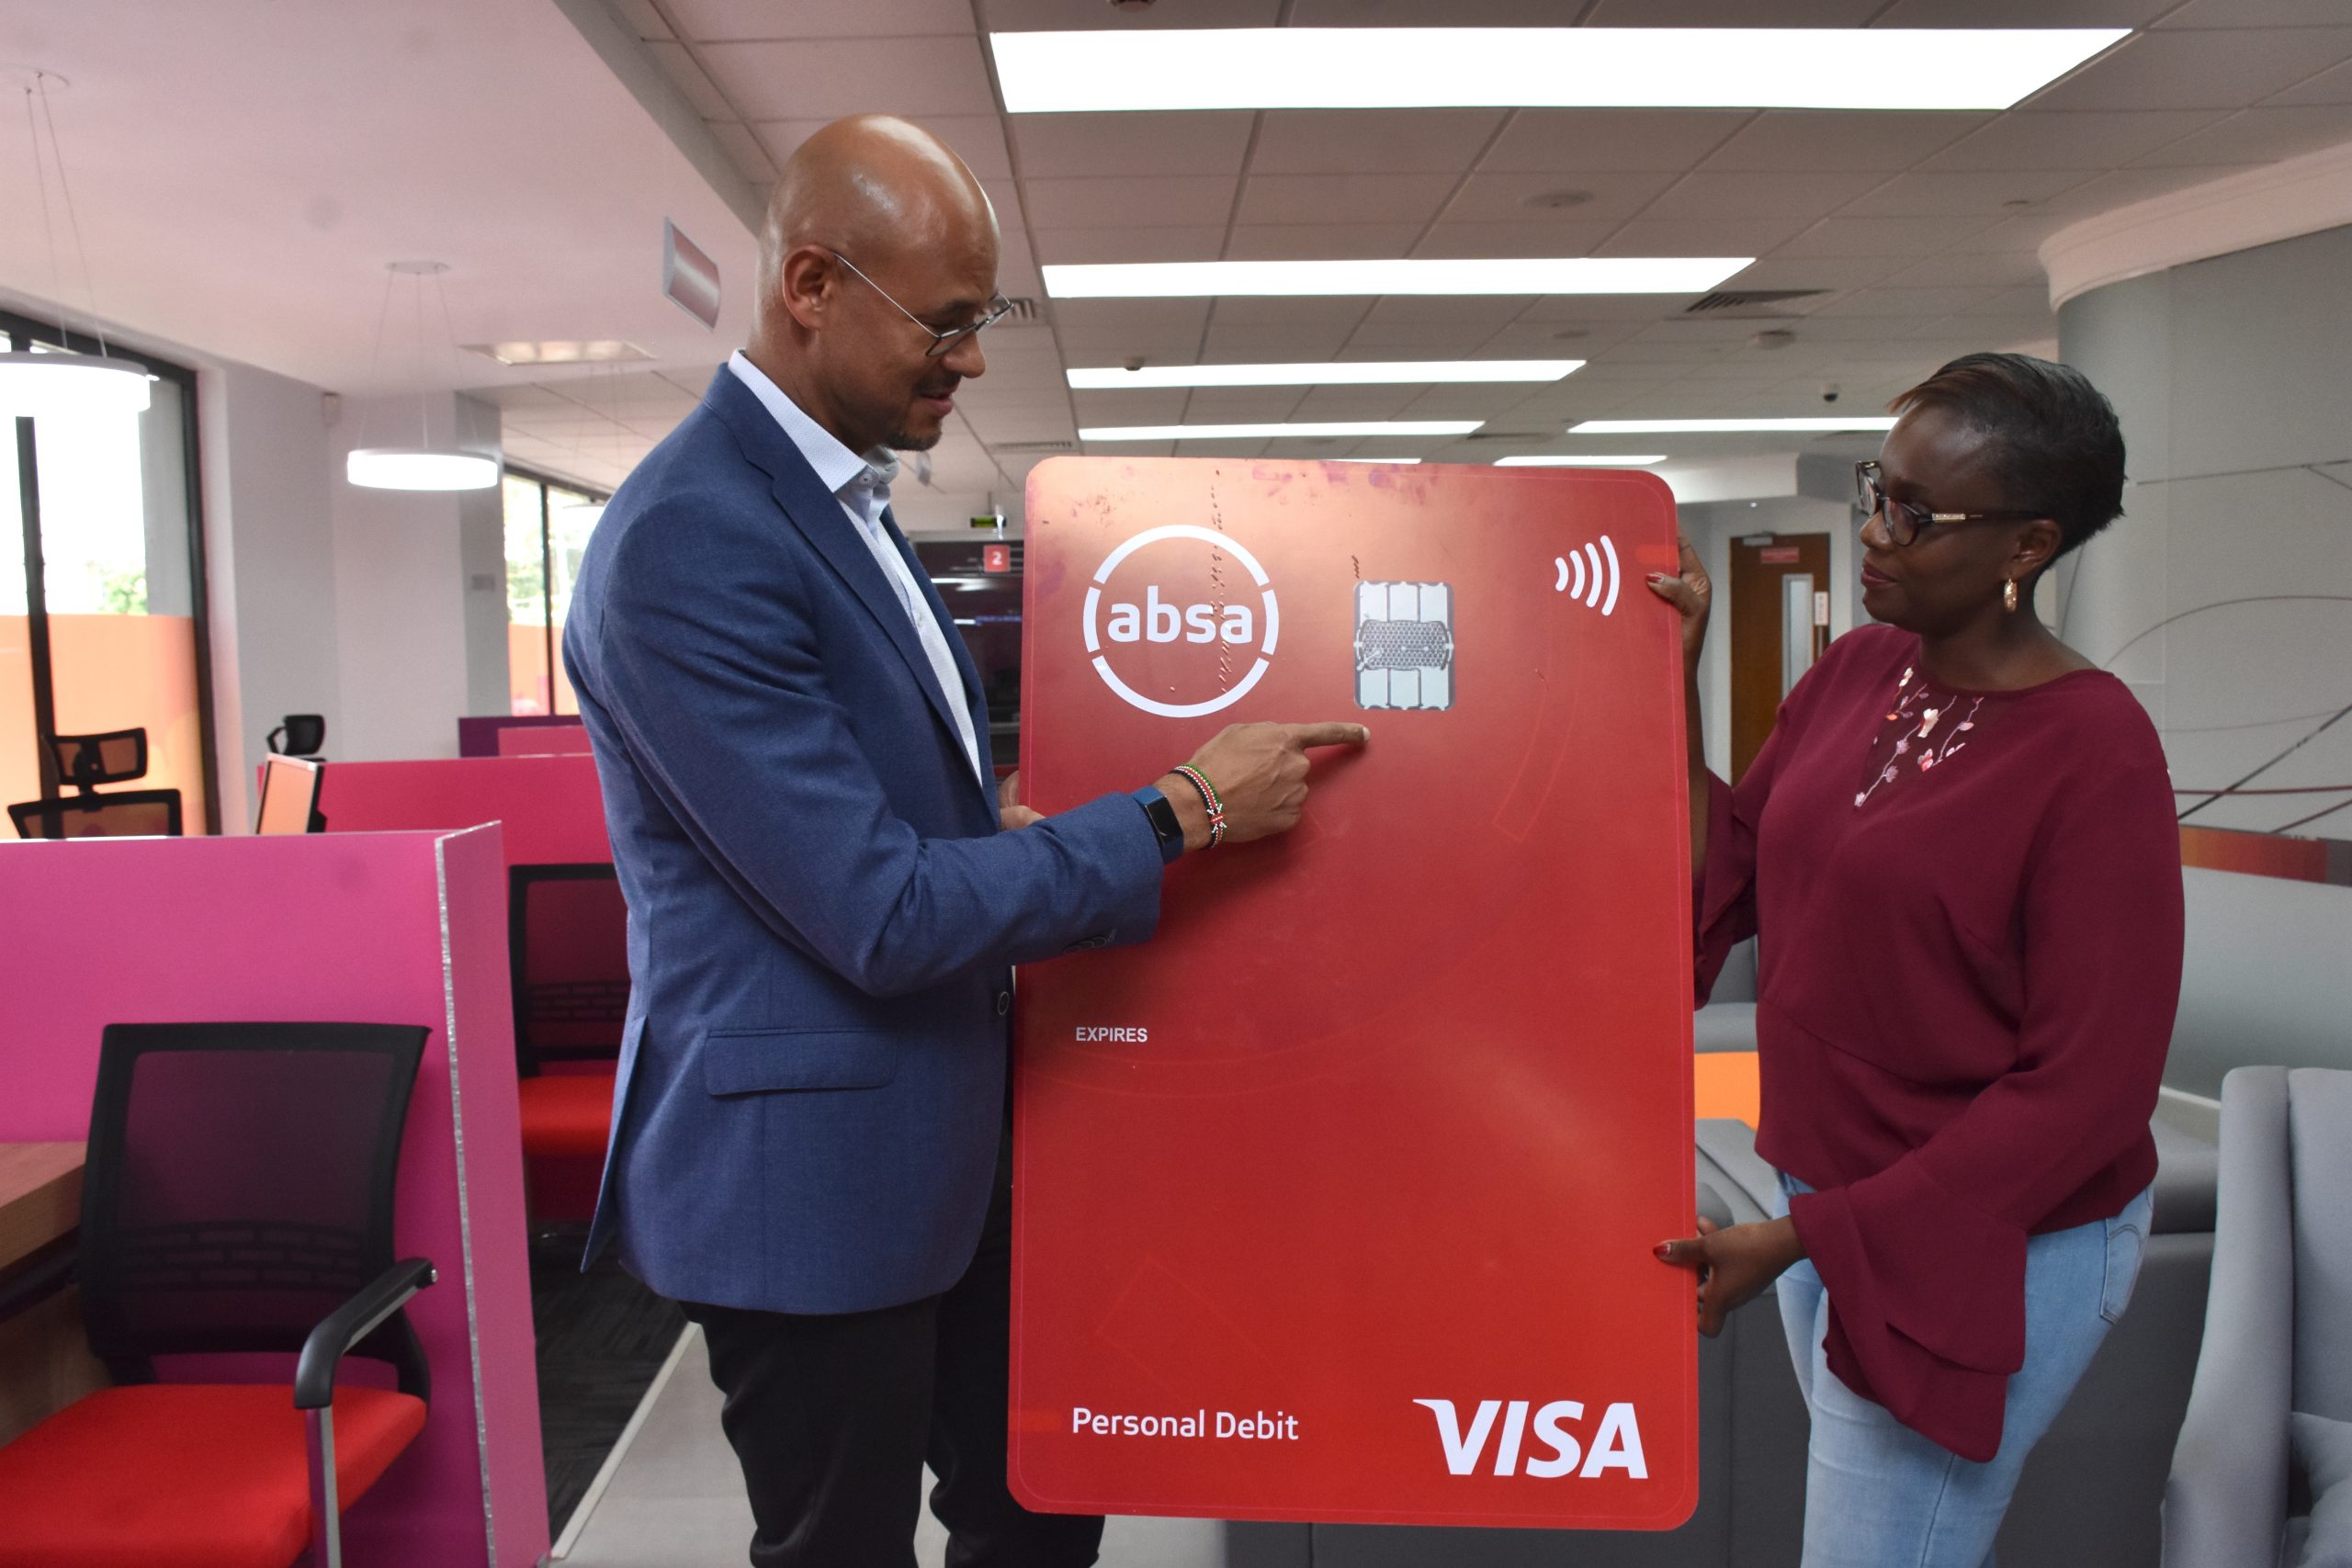 Jeremy Awori, Managing Director of Barclays Kenya, soon to be Absa, explains features of the new vertical Absa credit and debit cards to Sheila Momanyi, Manager Sarit Centre branch. www.businesstoday.co.ke